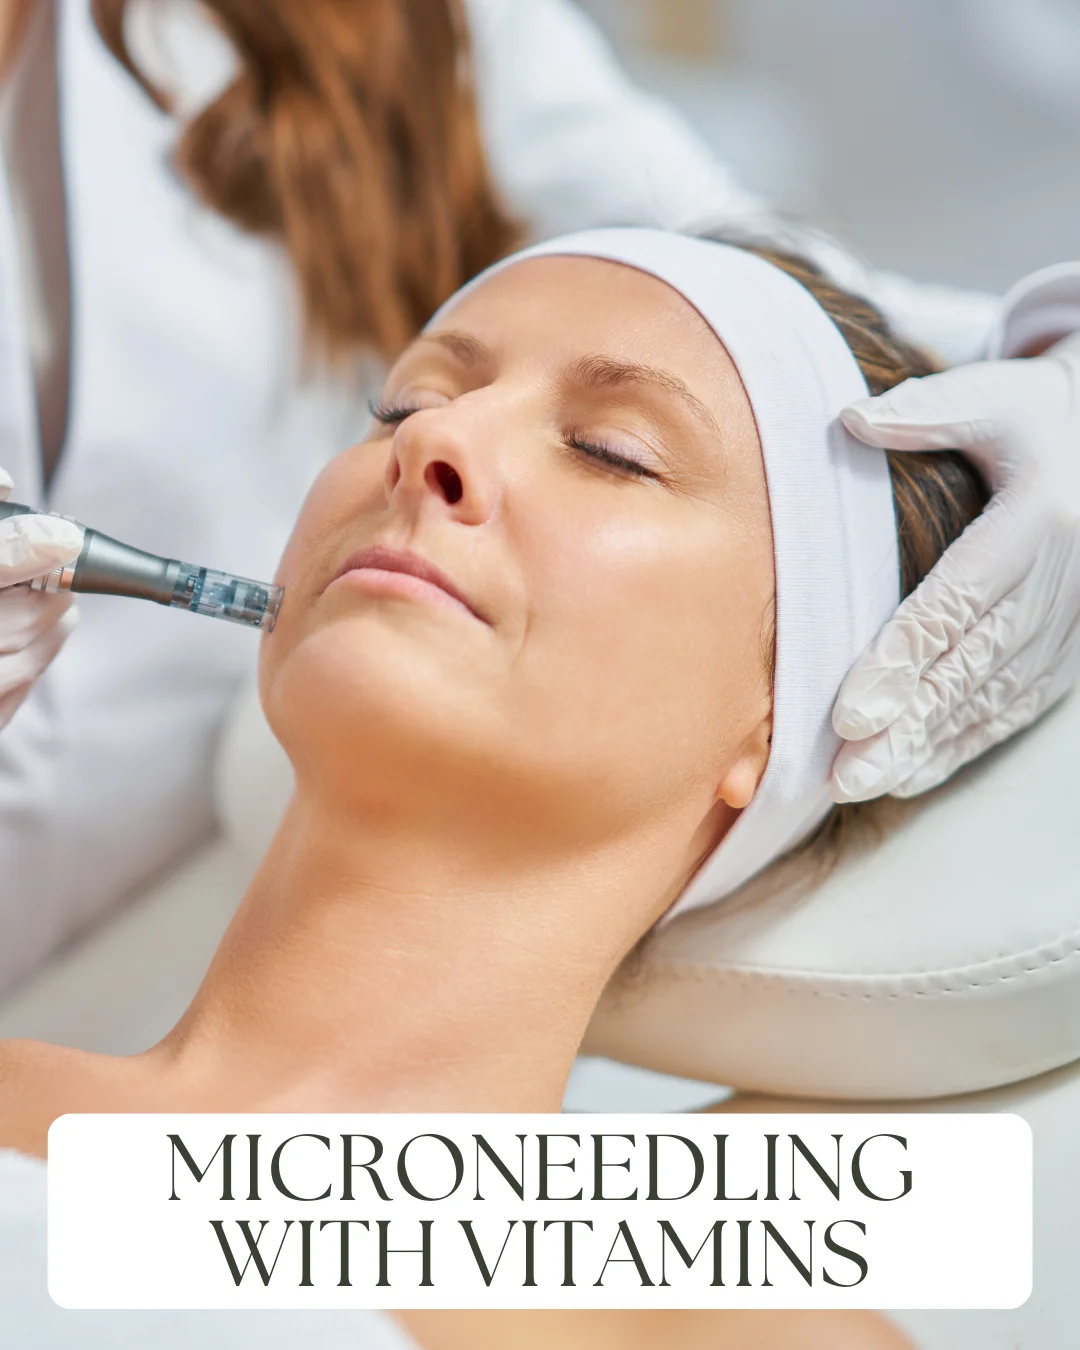 10. Microneedling with Vitamins